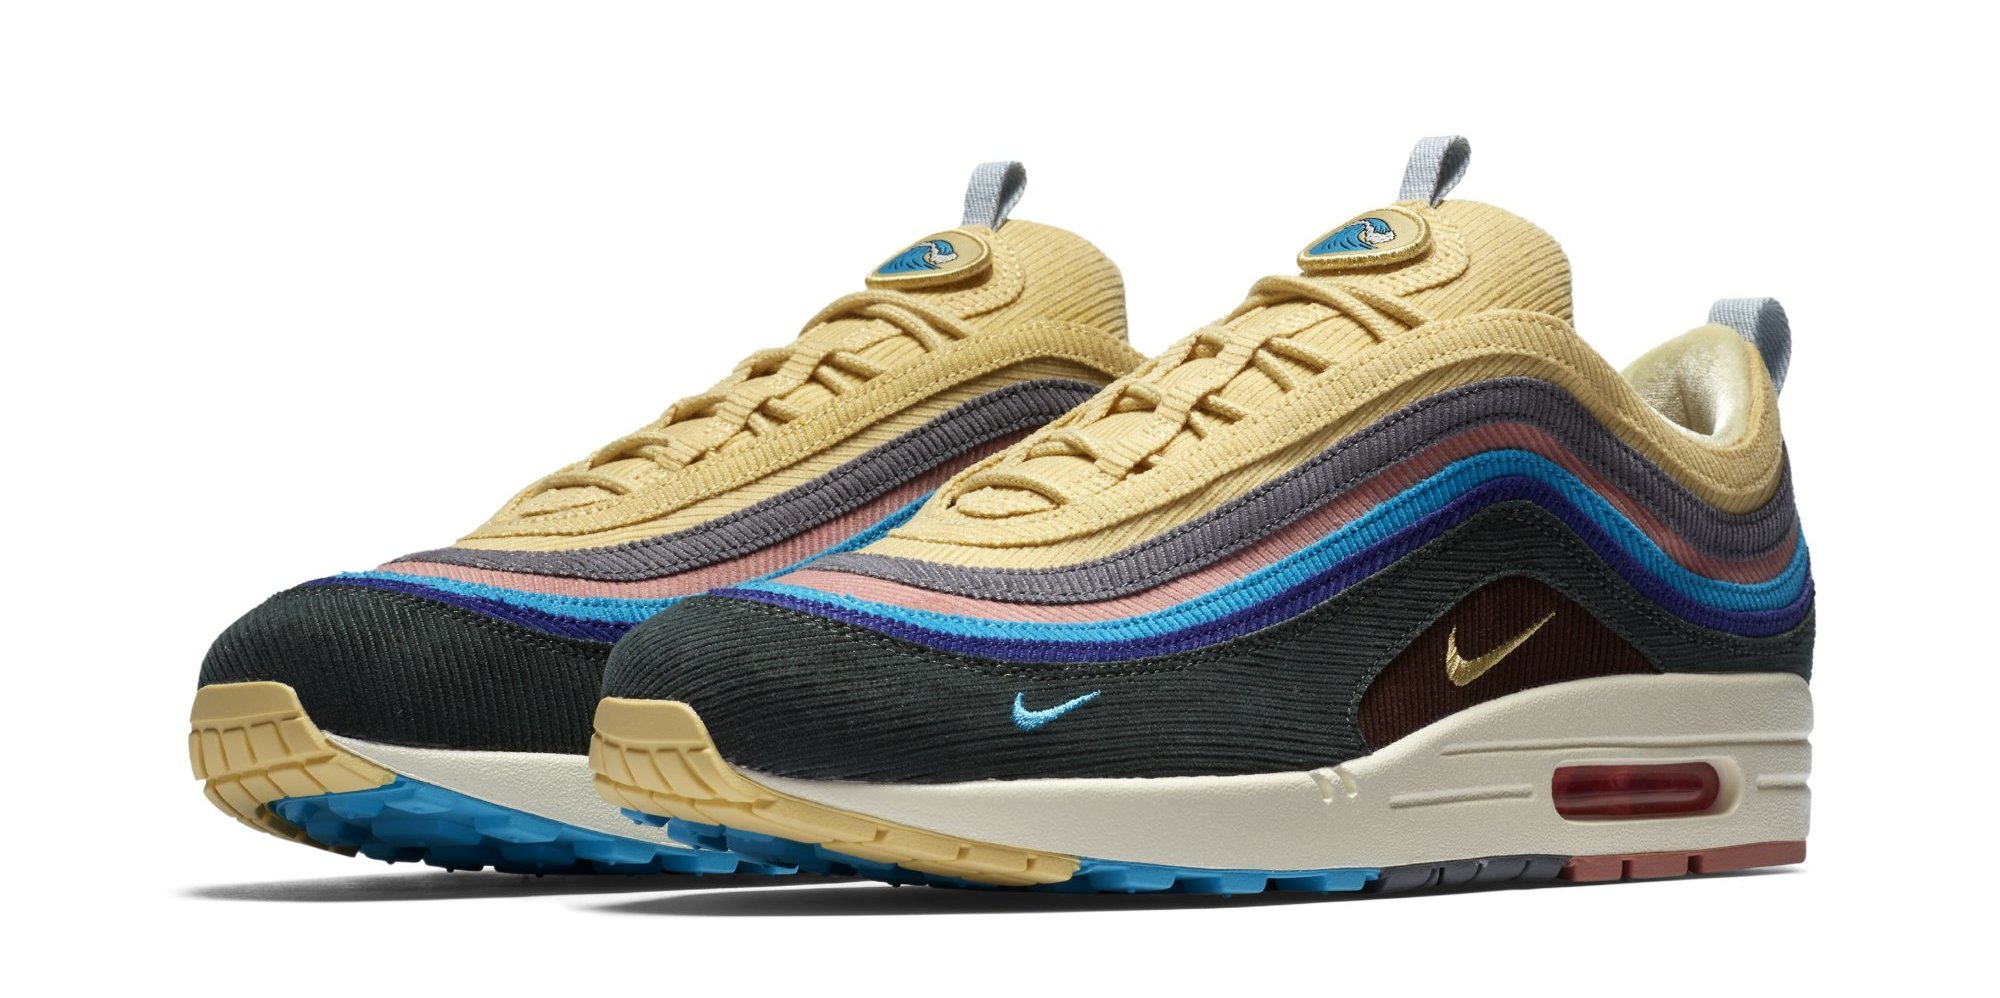 wotherspoon air maxes